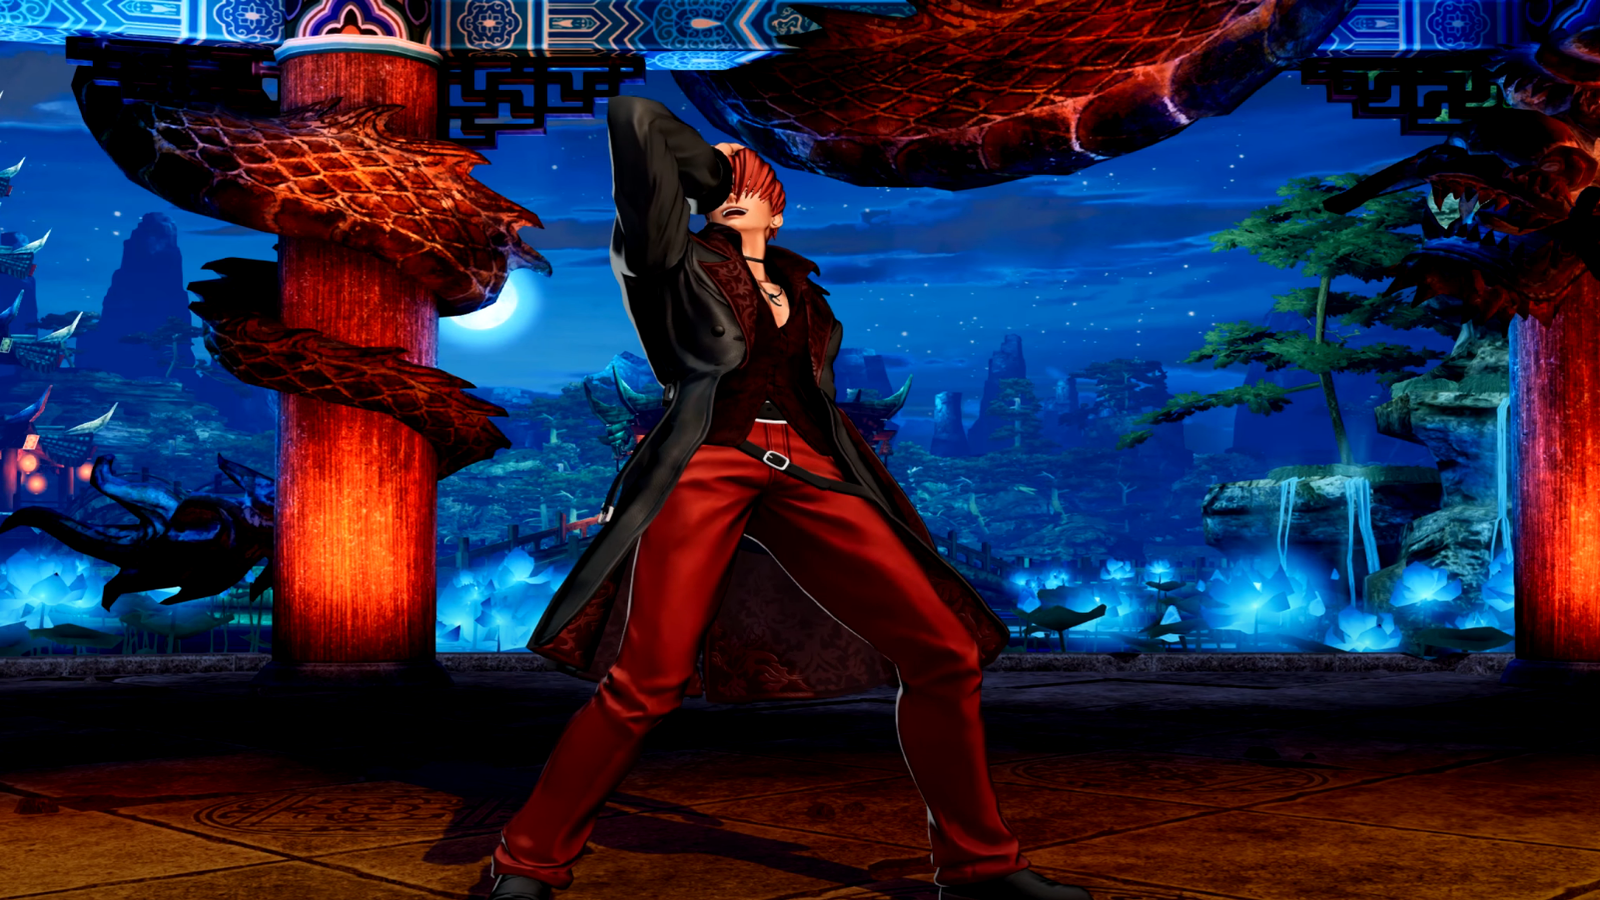 King of Fighters XV - Iori Yagami: Character Trailer